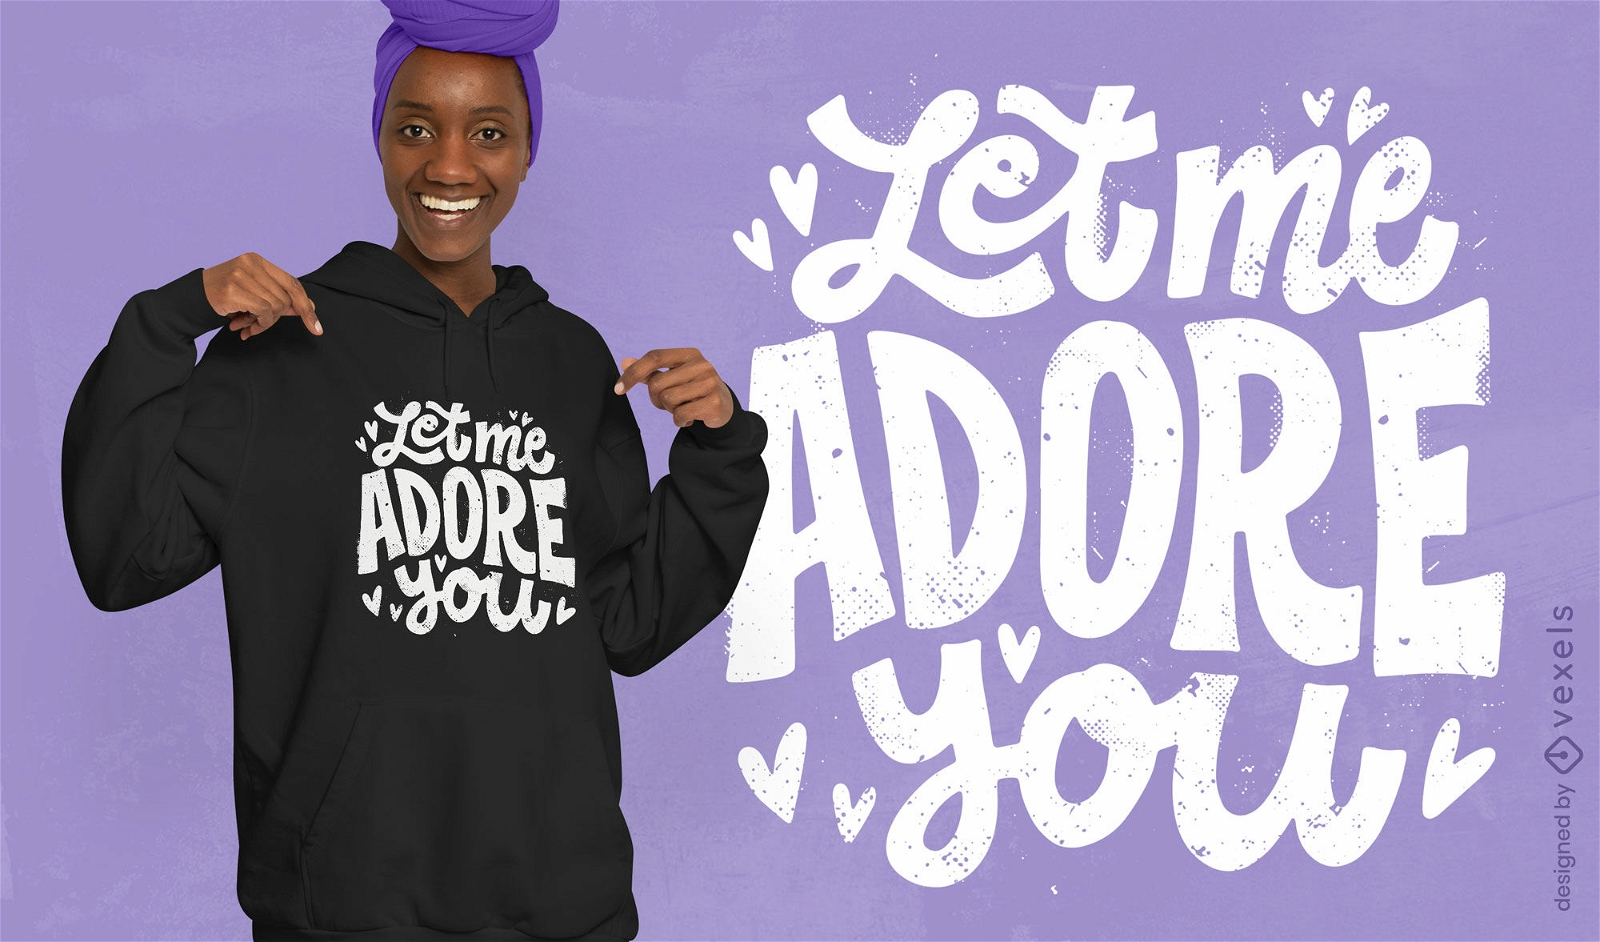 Adore you lettering t-shirt design